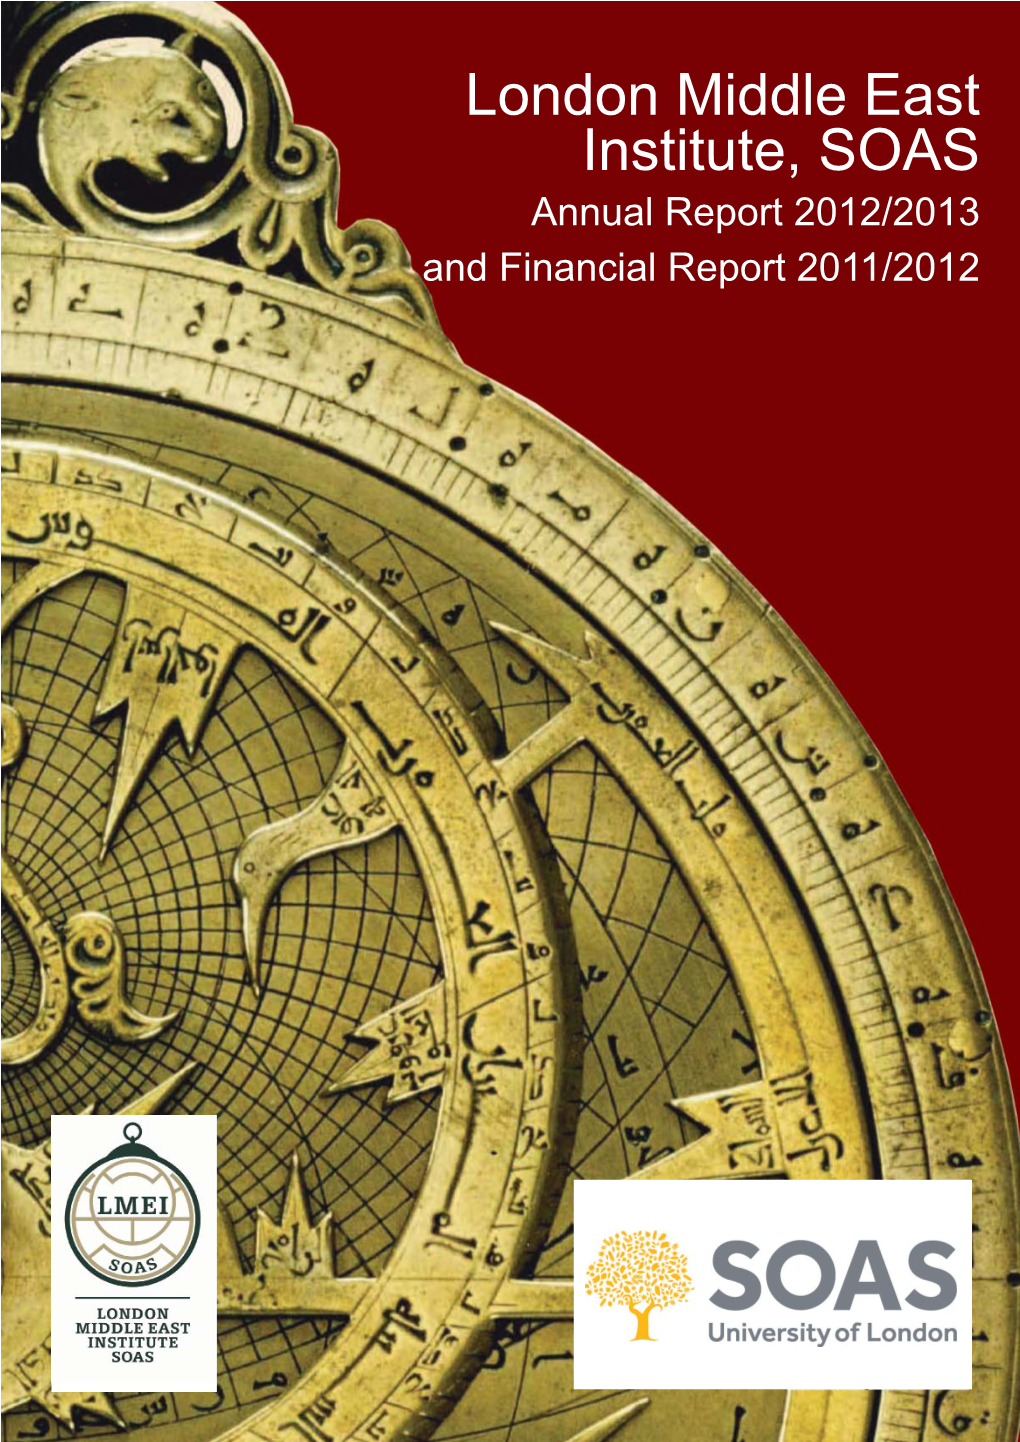 London Middle East Institute, SOAS Annual Report 2012/2013 and Financial Report 2011/2012